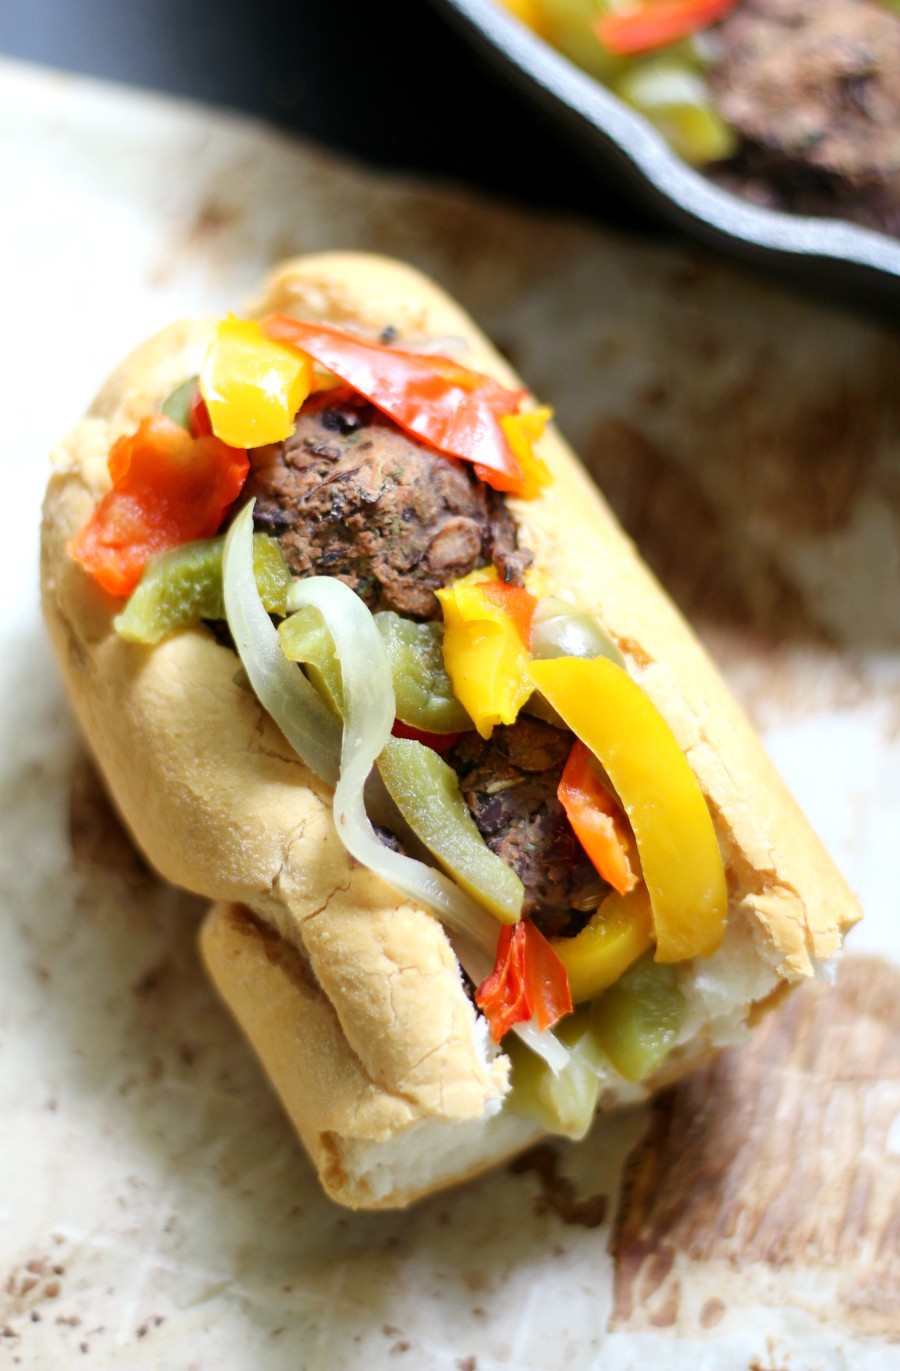 Vegan Boardwalk Italian Sausage & Peppers Sandwiches (Gluten-Free, Allergy-Free) | Strength and Sunshine @RebeccaGF666 A Jersey Shore classic! These meatless Boardwalk Italian Sausage & Peppers Sandwiches are vegan, gluten-free, and top 8 allergy-free! A simple, delicious, and healthy recipe for your greasy favorite summer comfort food!